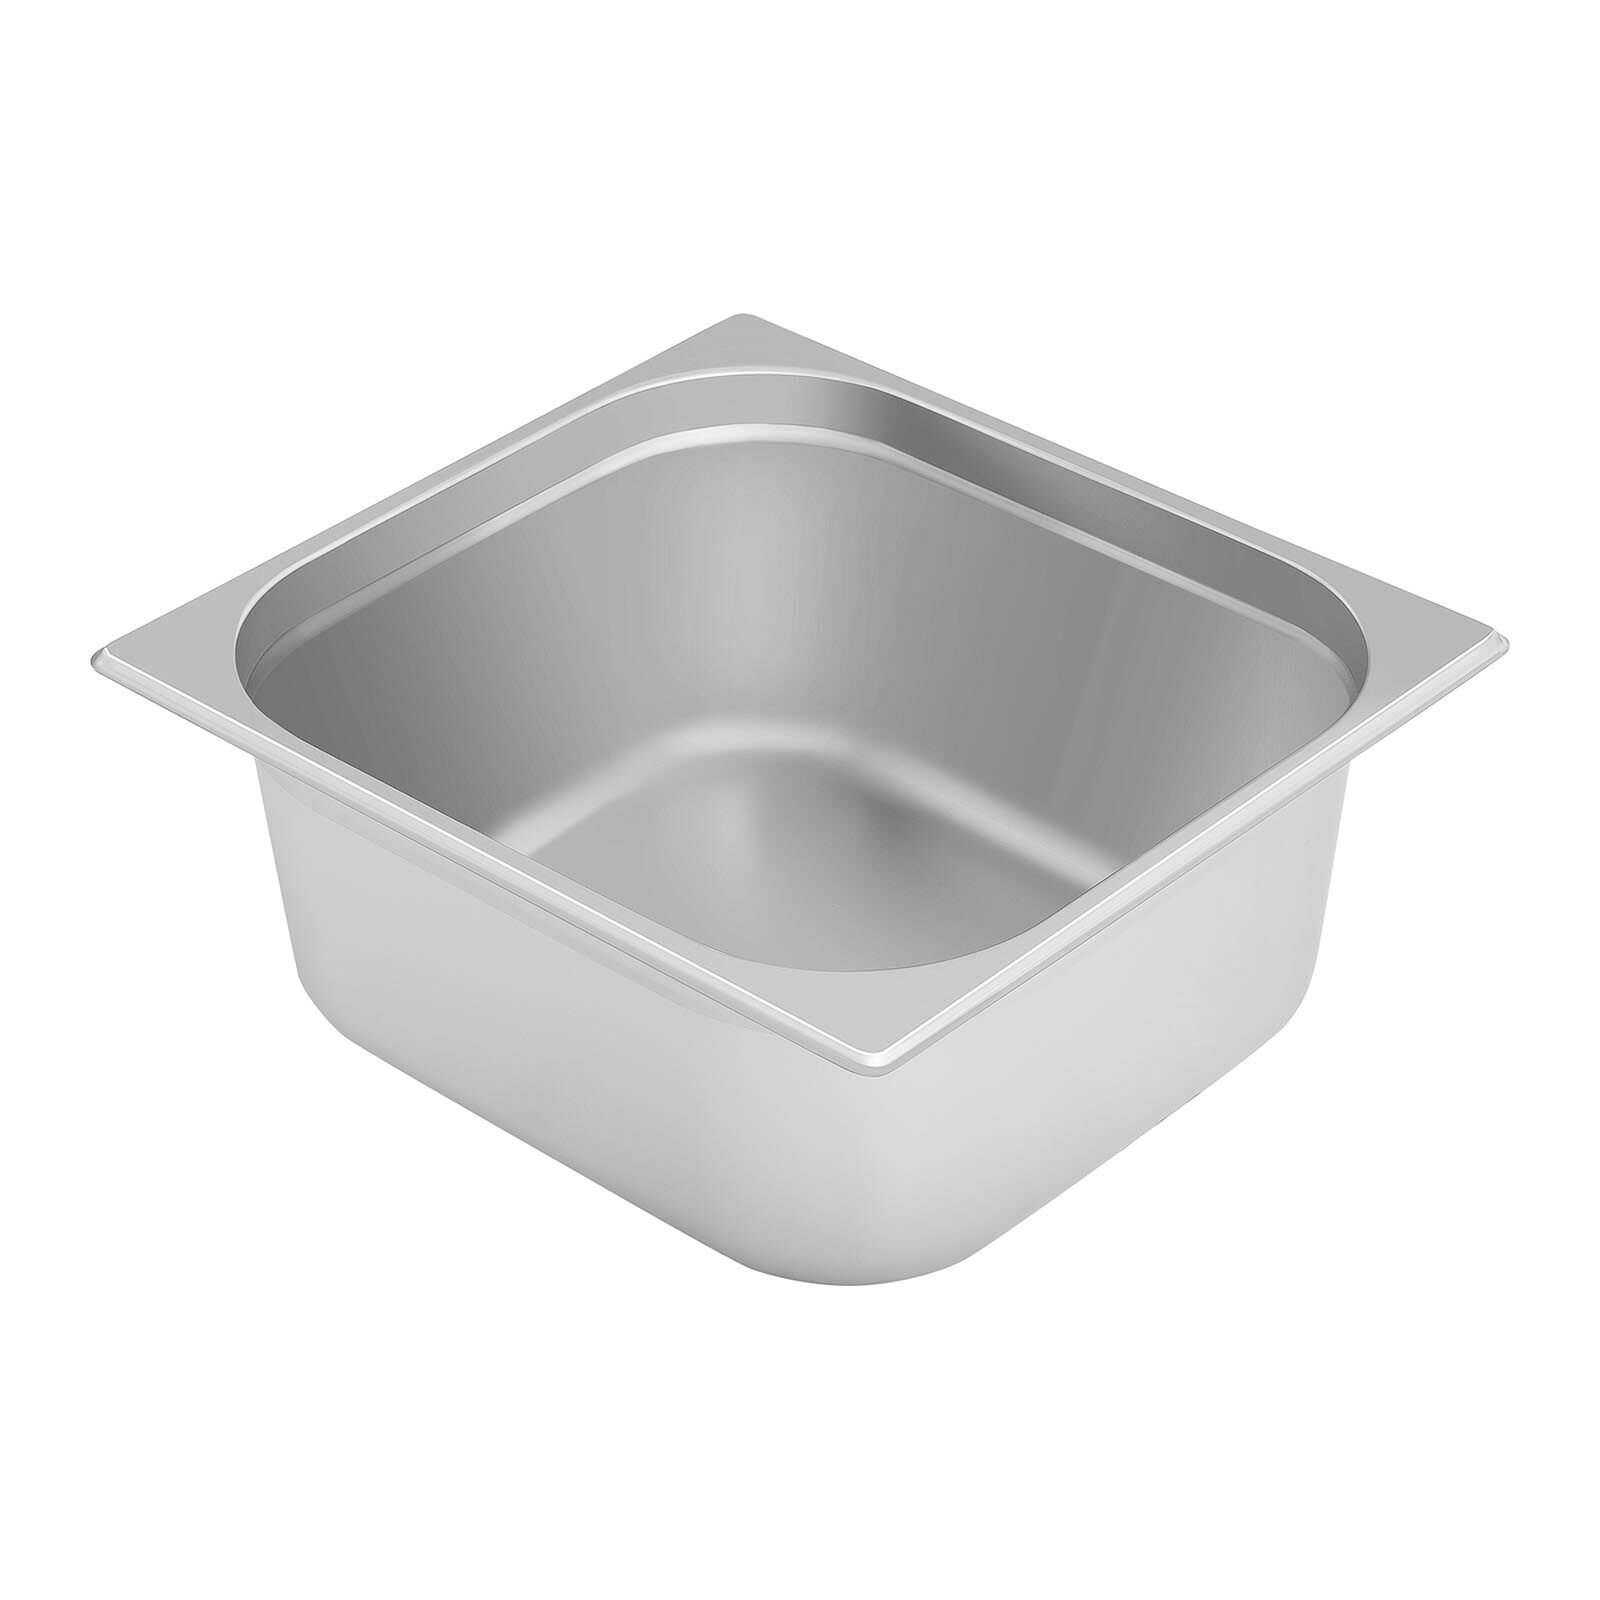 Royal Catering Gastronorm Tray - 2/3 - 150 mm RCGN-2/3X150